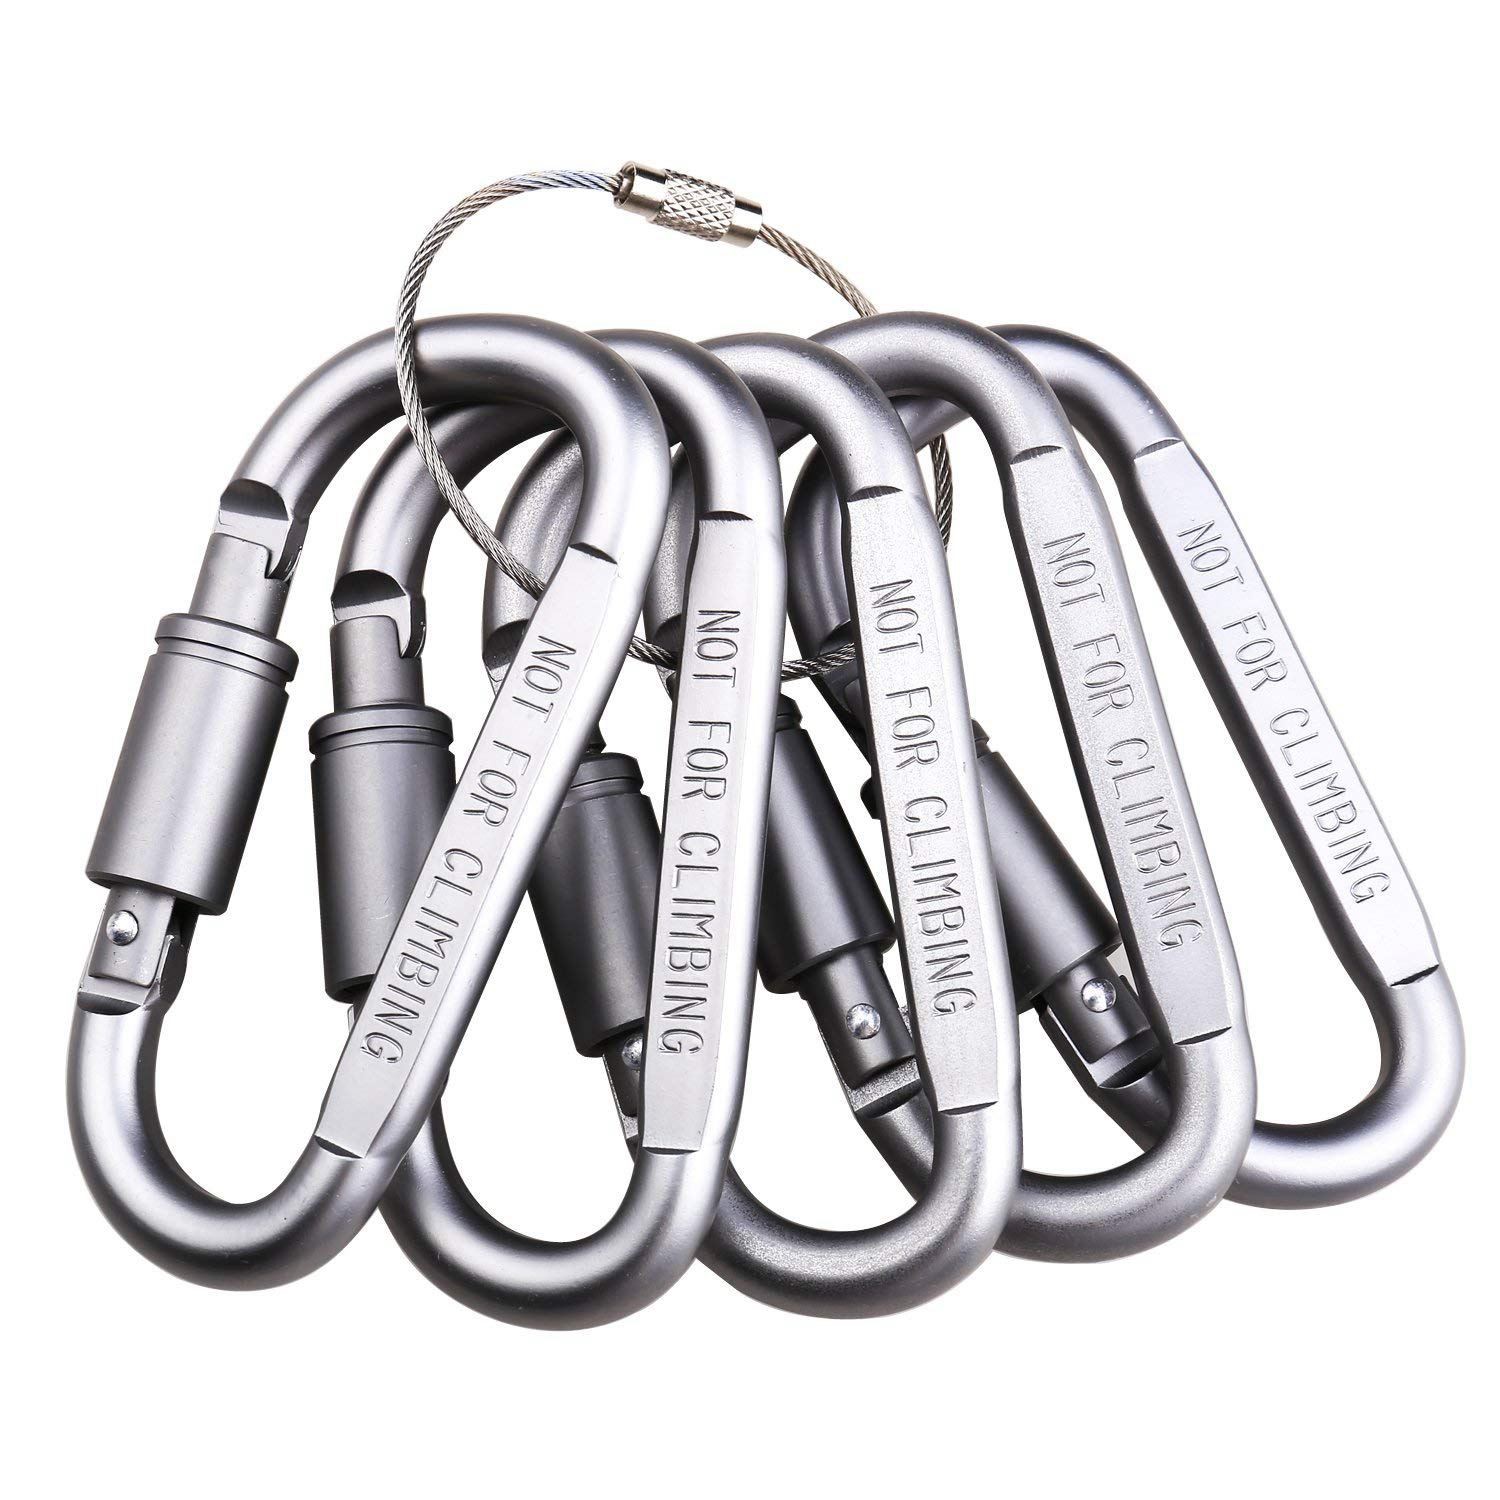 Aluminum alloy D Ring Clip D Shape Super Durable Strong and Large Carabiner keyring Keychain Clip for Outdoor Camping Key Chain Heavy Duty Screw Gate Lock Hooks Spring Link